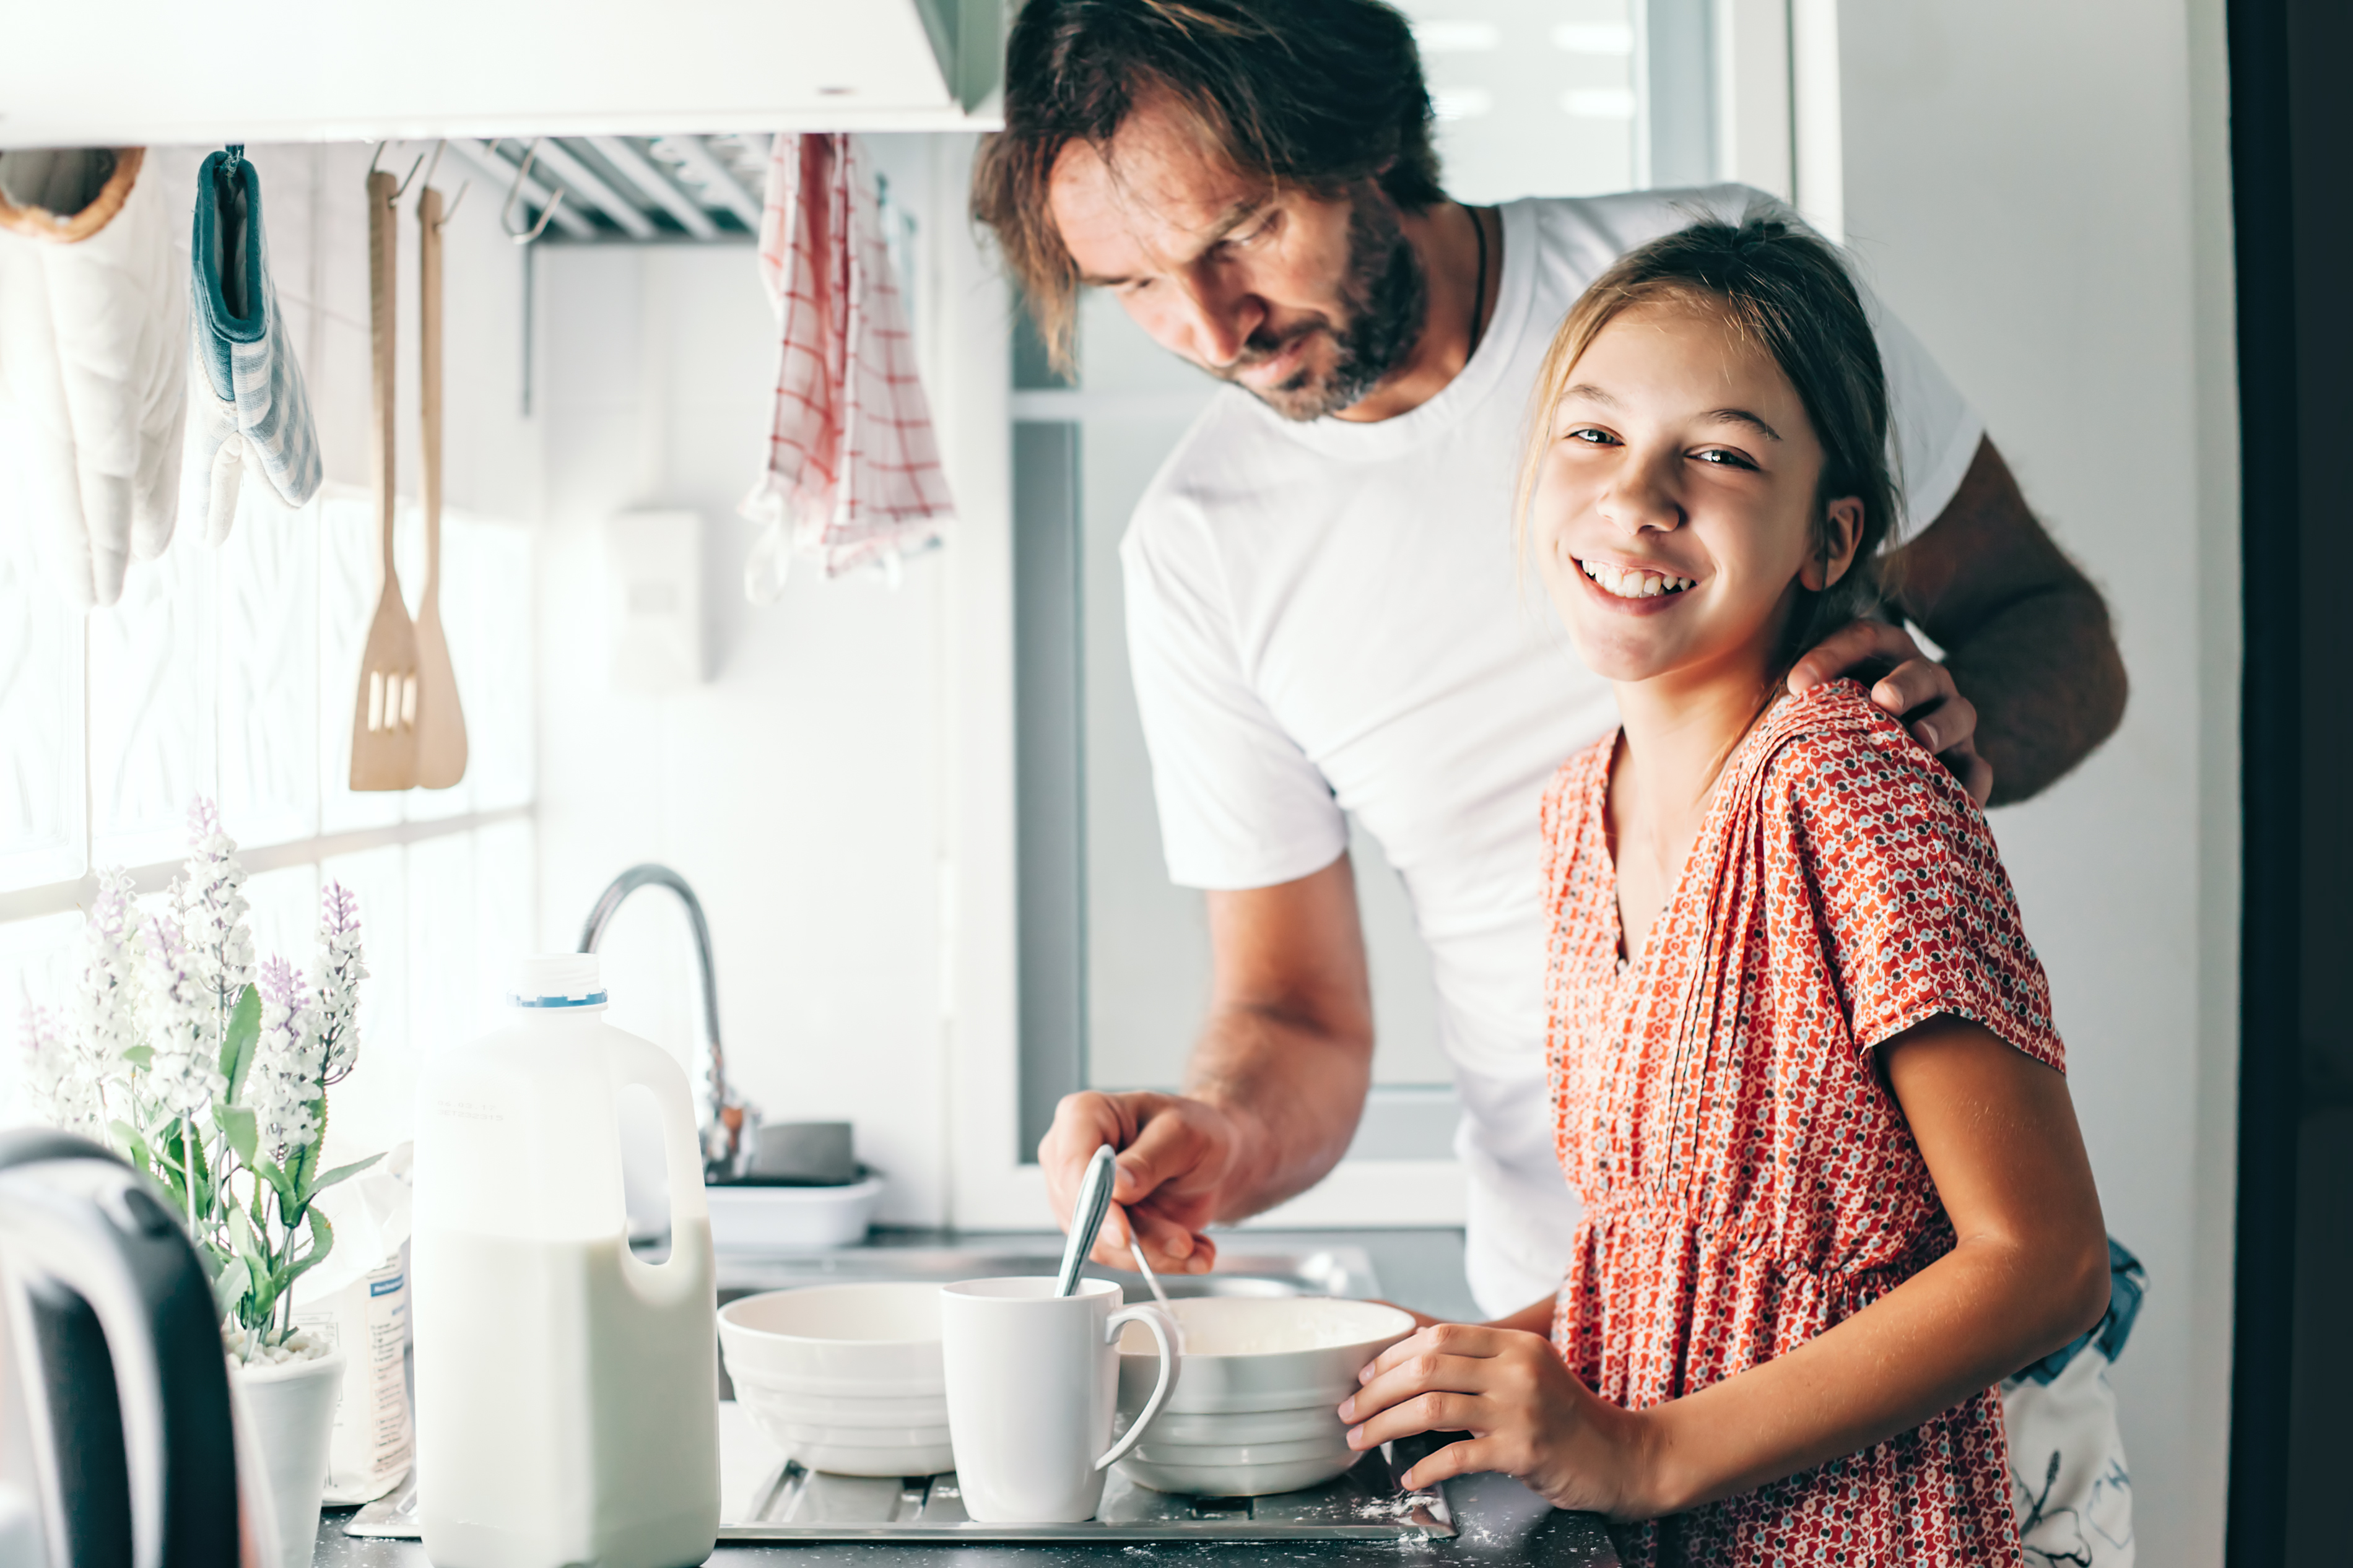 Father and daughter in the kitchen | Source: Shutterstock